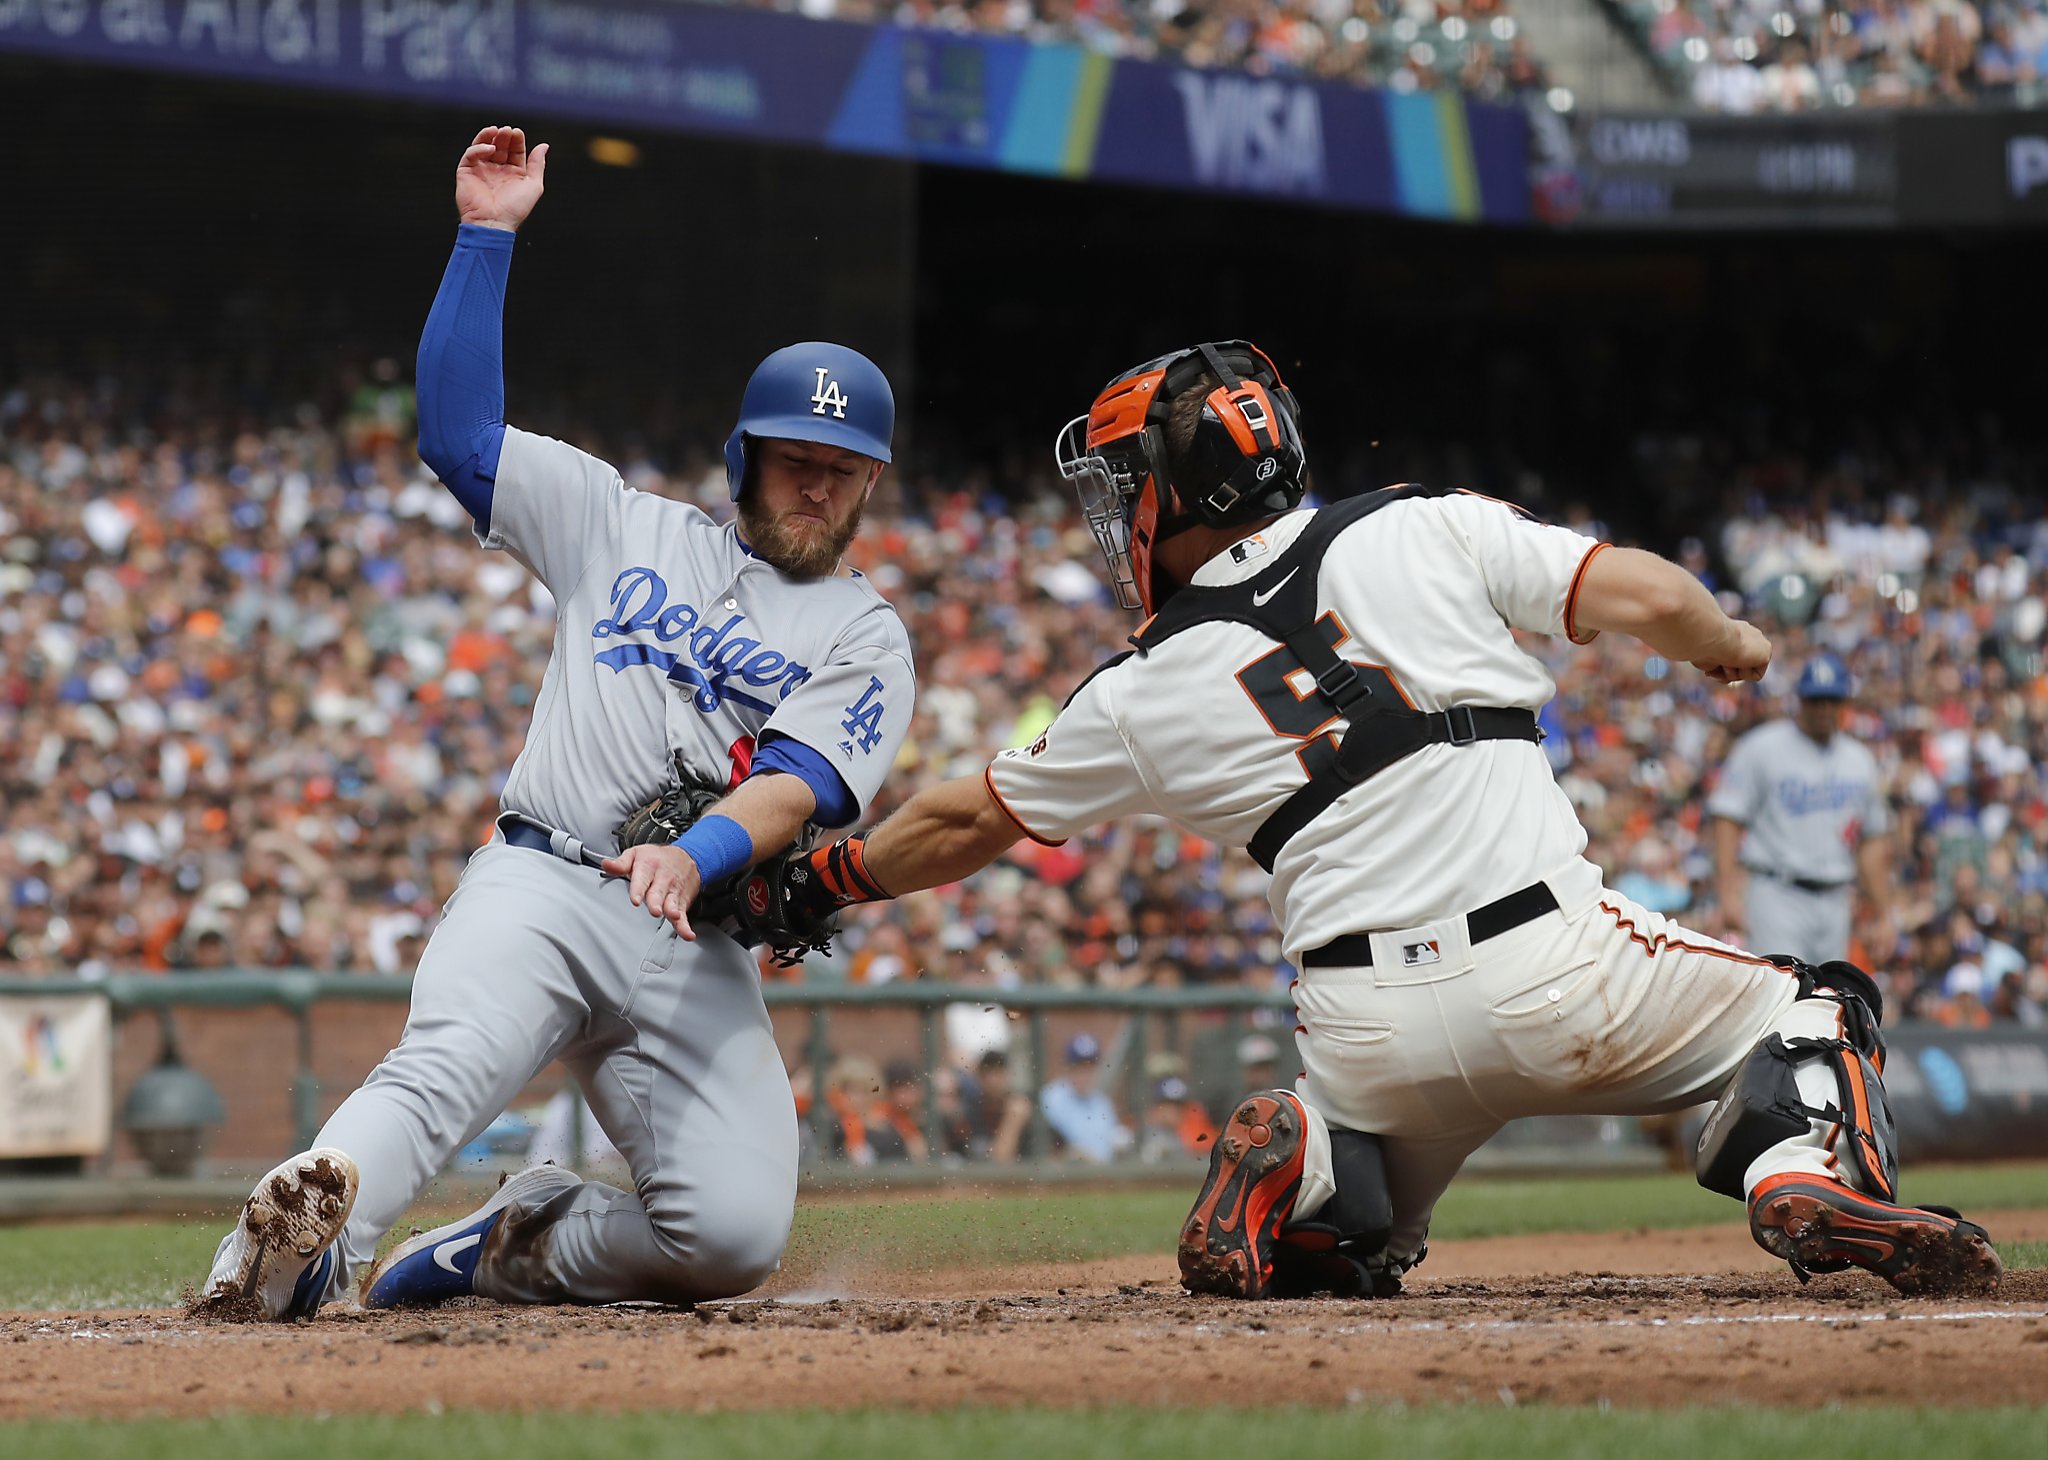 Dodgers beat Giants at AT&T Park to clinch playoff spot - SFGate2048 x 1460